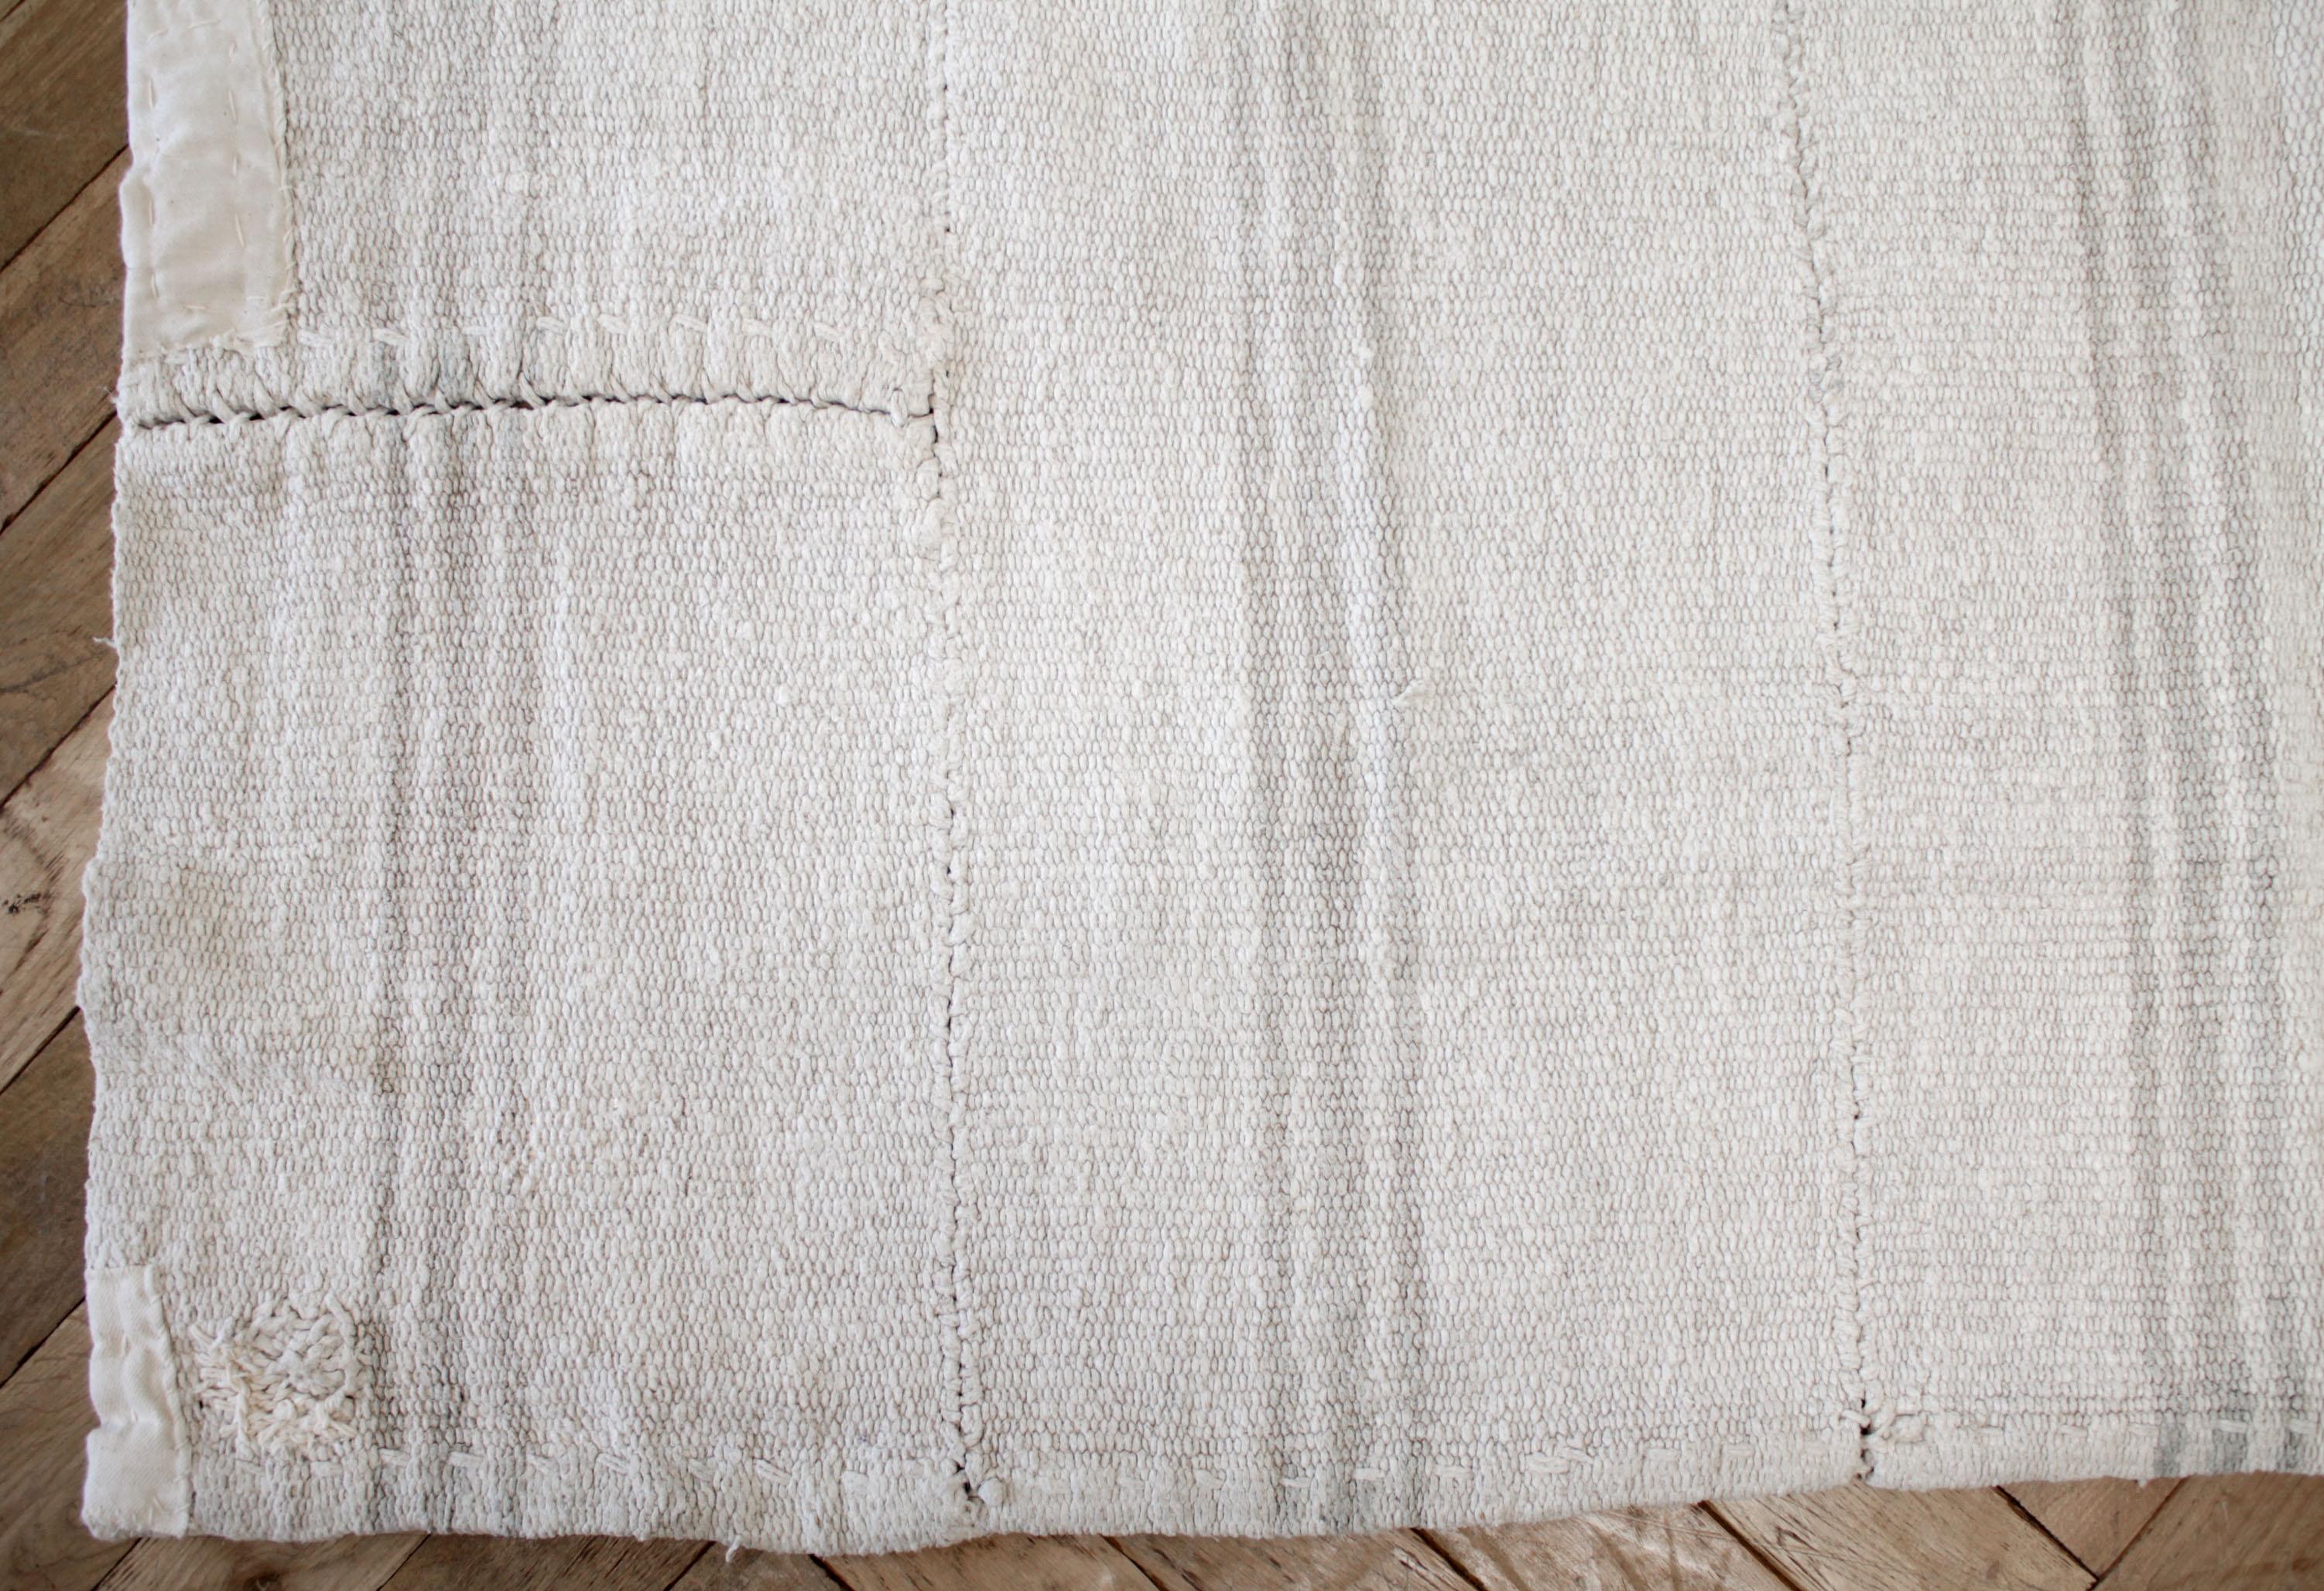 Penelope vintage Hemp Turkish rug in oyster white with light taupe stripes
Vintage Turkish rug in made from Hemp, in a light natural, or off-white color, with a light gray, almost taupe gray stripe. Original patchwork with hand